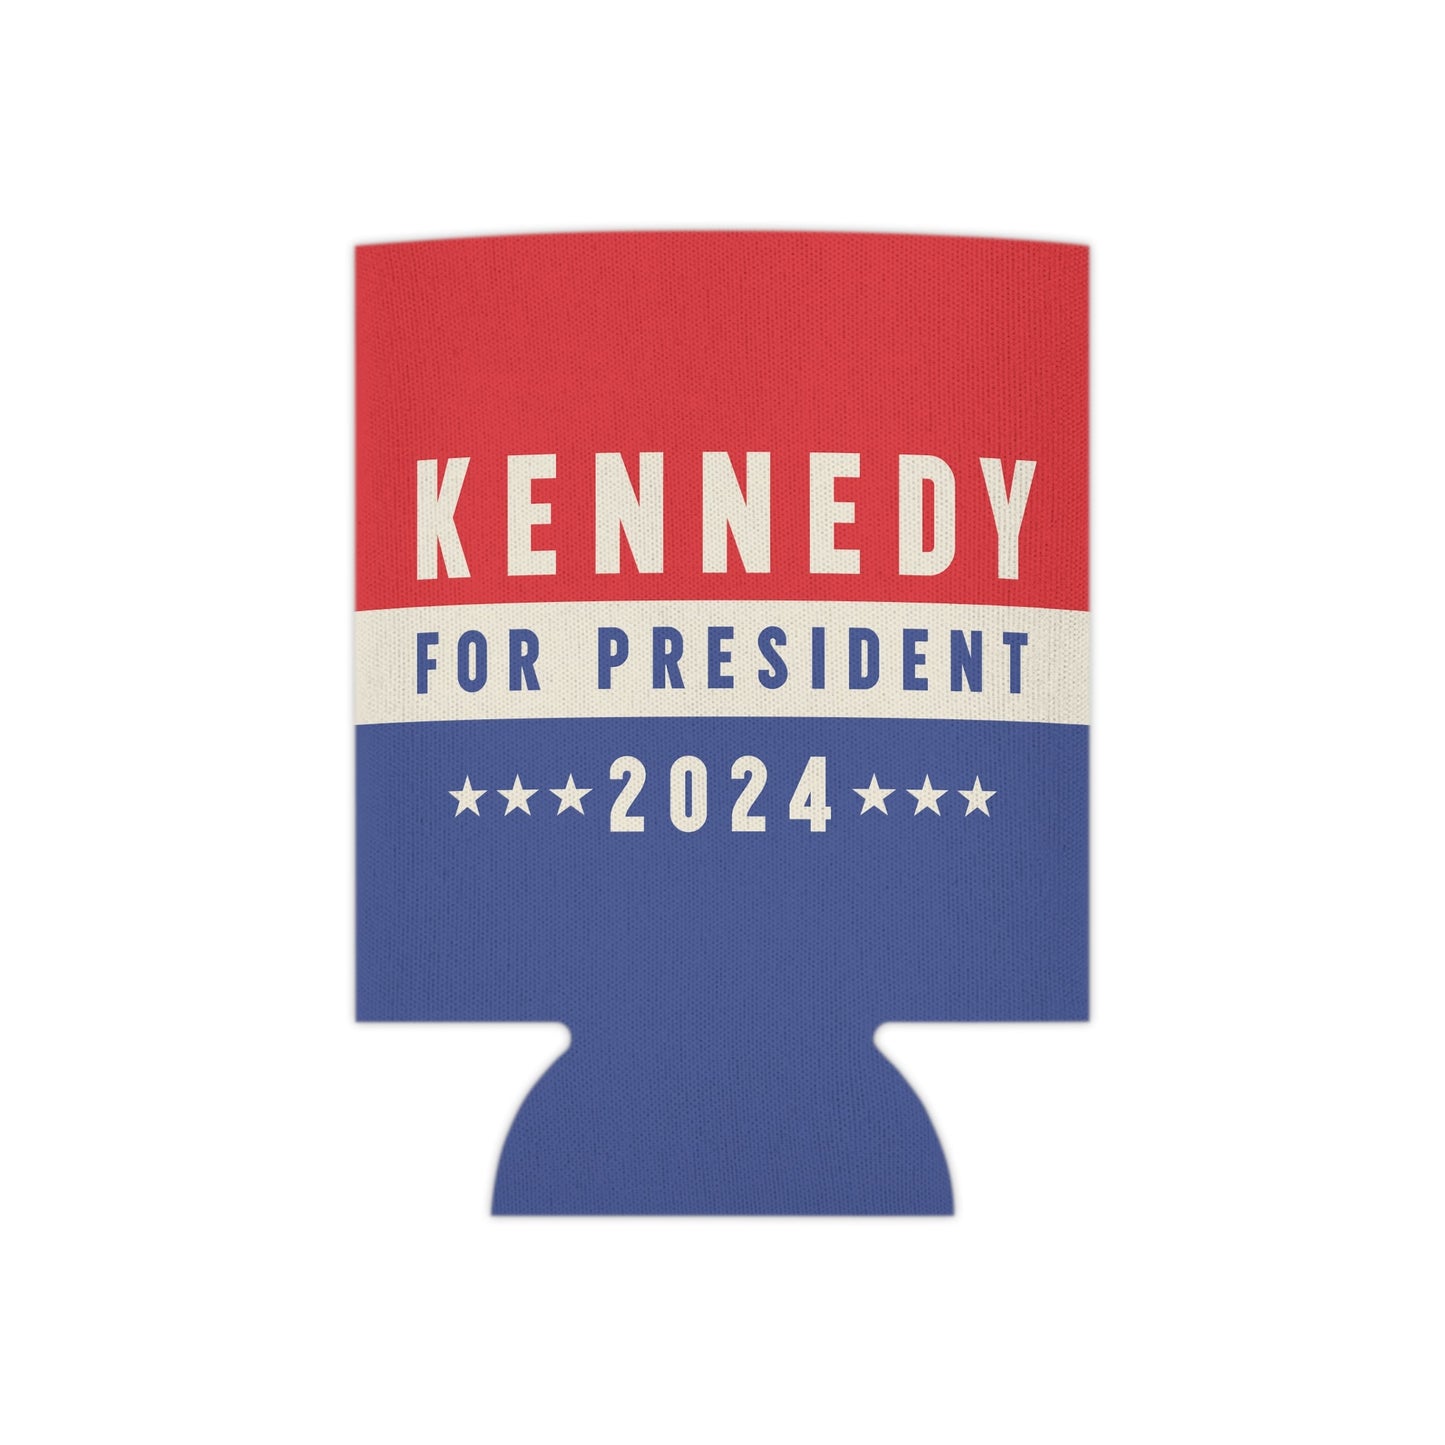 Kennedy for President 2024 Vintage Can Cooler - TEAM KENNEDY. All rights reserved